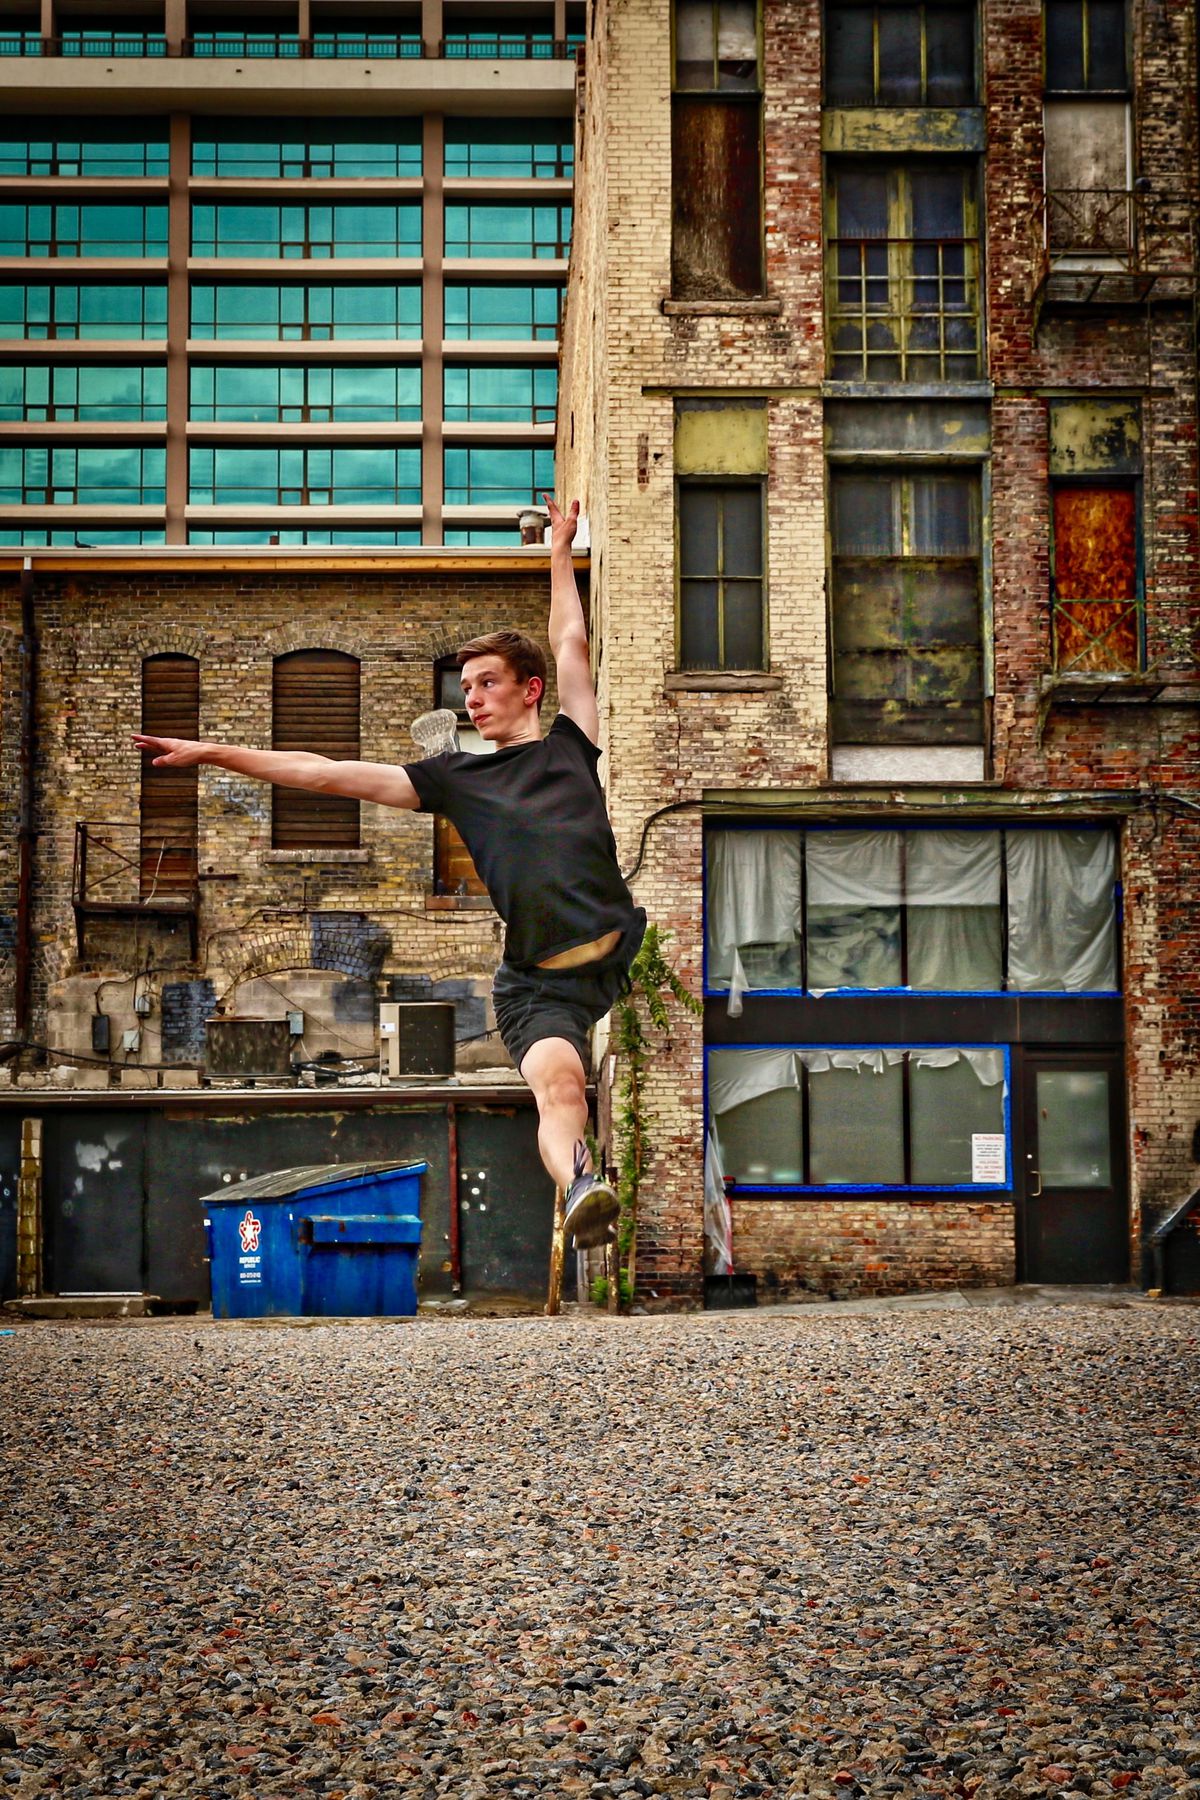 Tade Biesinger, an 18-year-old dancer and actor from Bountiful, played the title role in "Billy Elliot the Musical" on Broadway and will bring his skills to Pioneer Theatre Company's upcoming production of "Newsies."